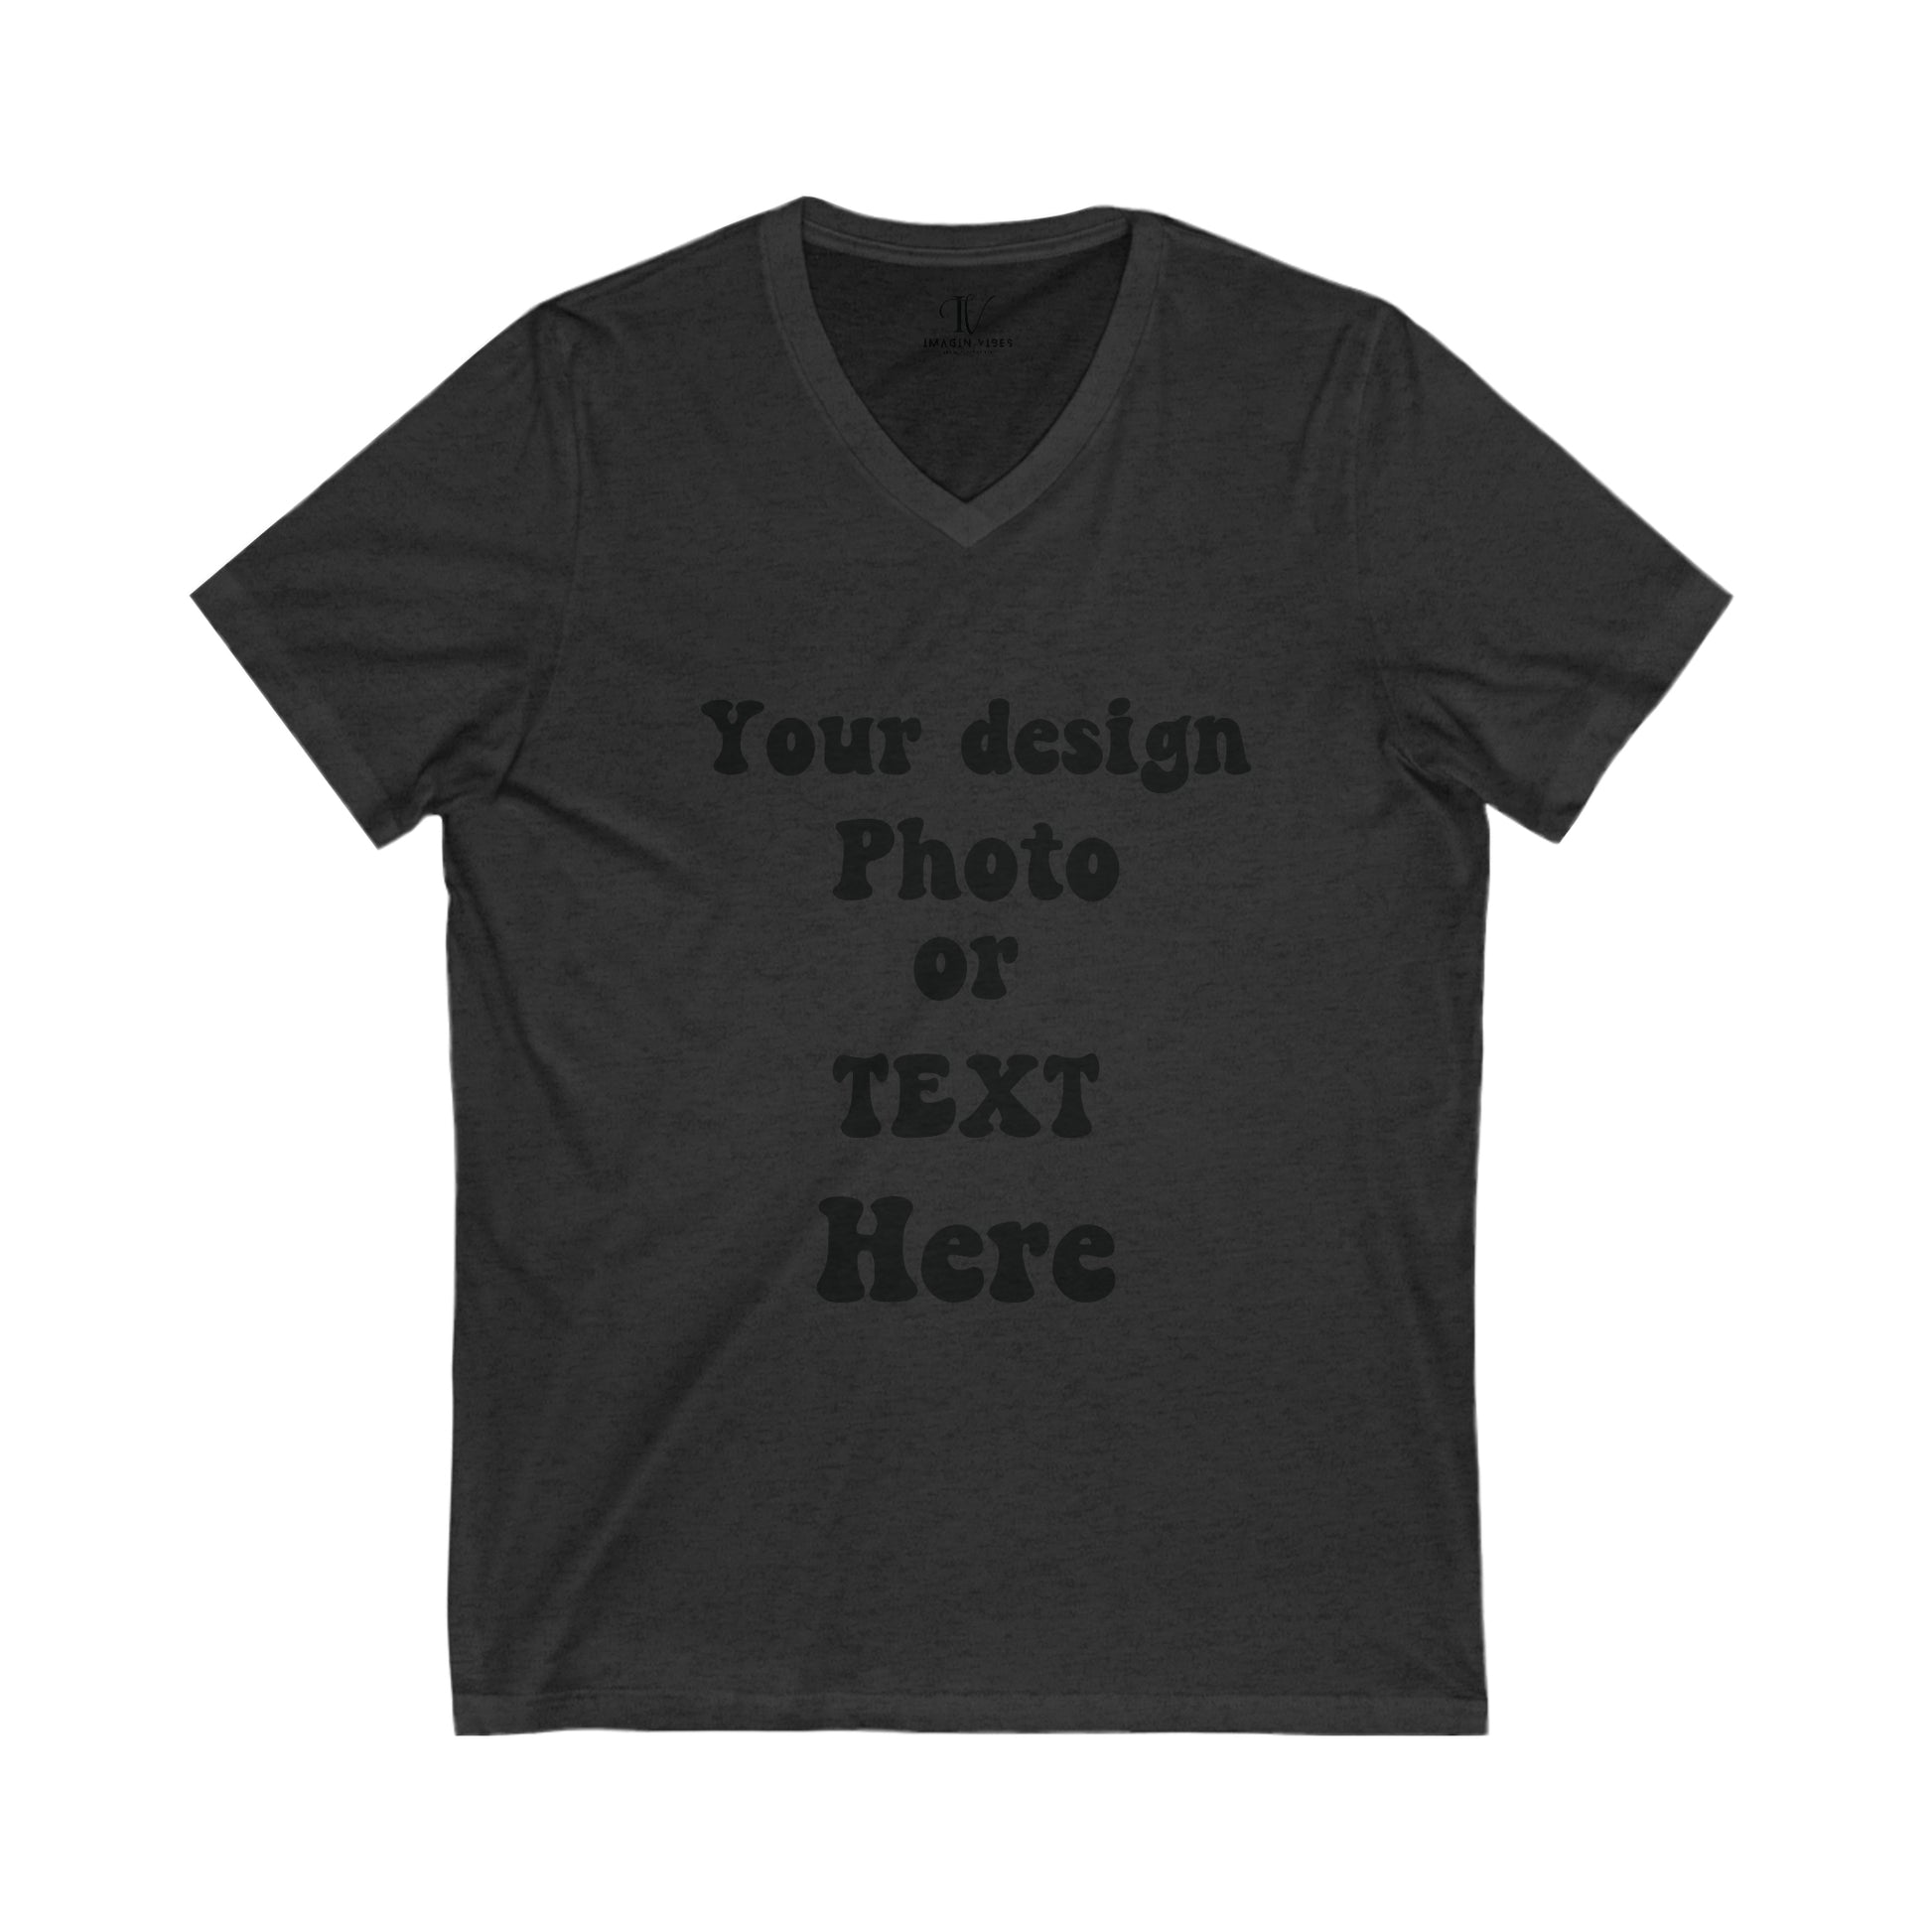 Express Your Unique Style with Our Custom V-Neck T-shirt - Personalized with Your Design, Photo, or Text | Made in USA V-neck S Dark Grey Heather 